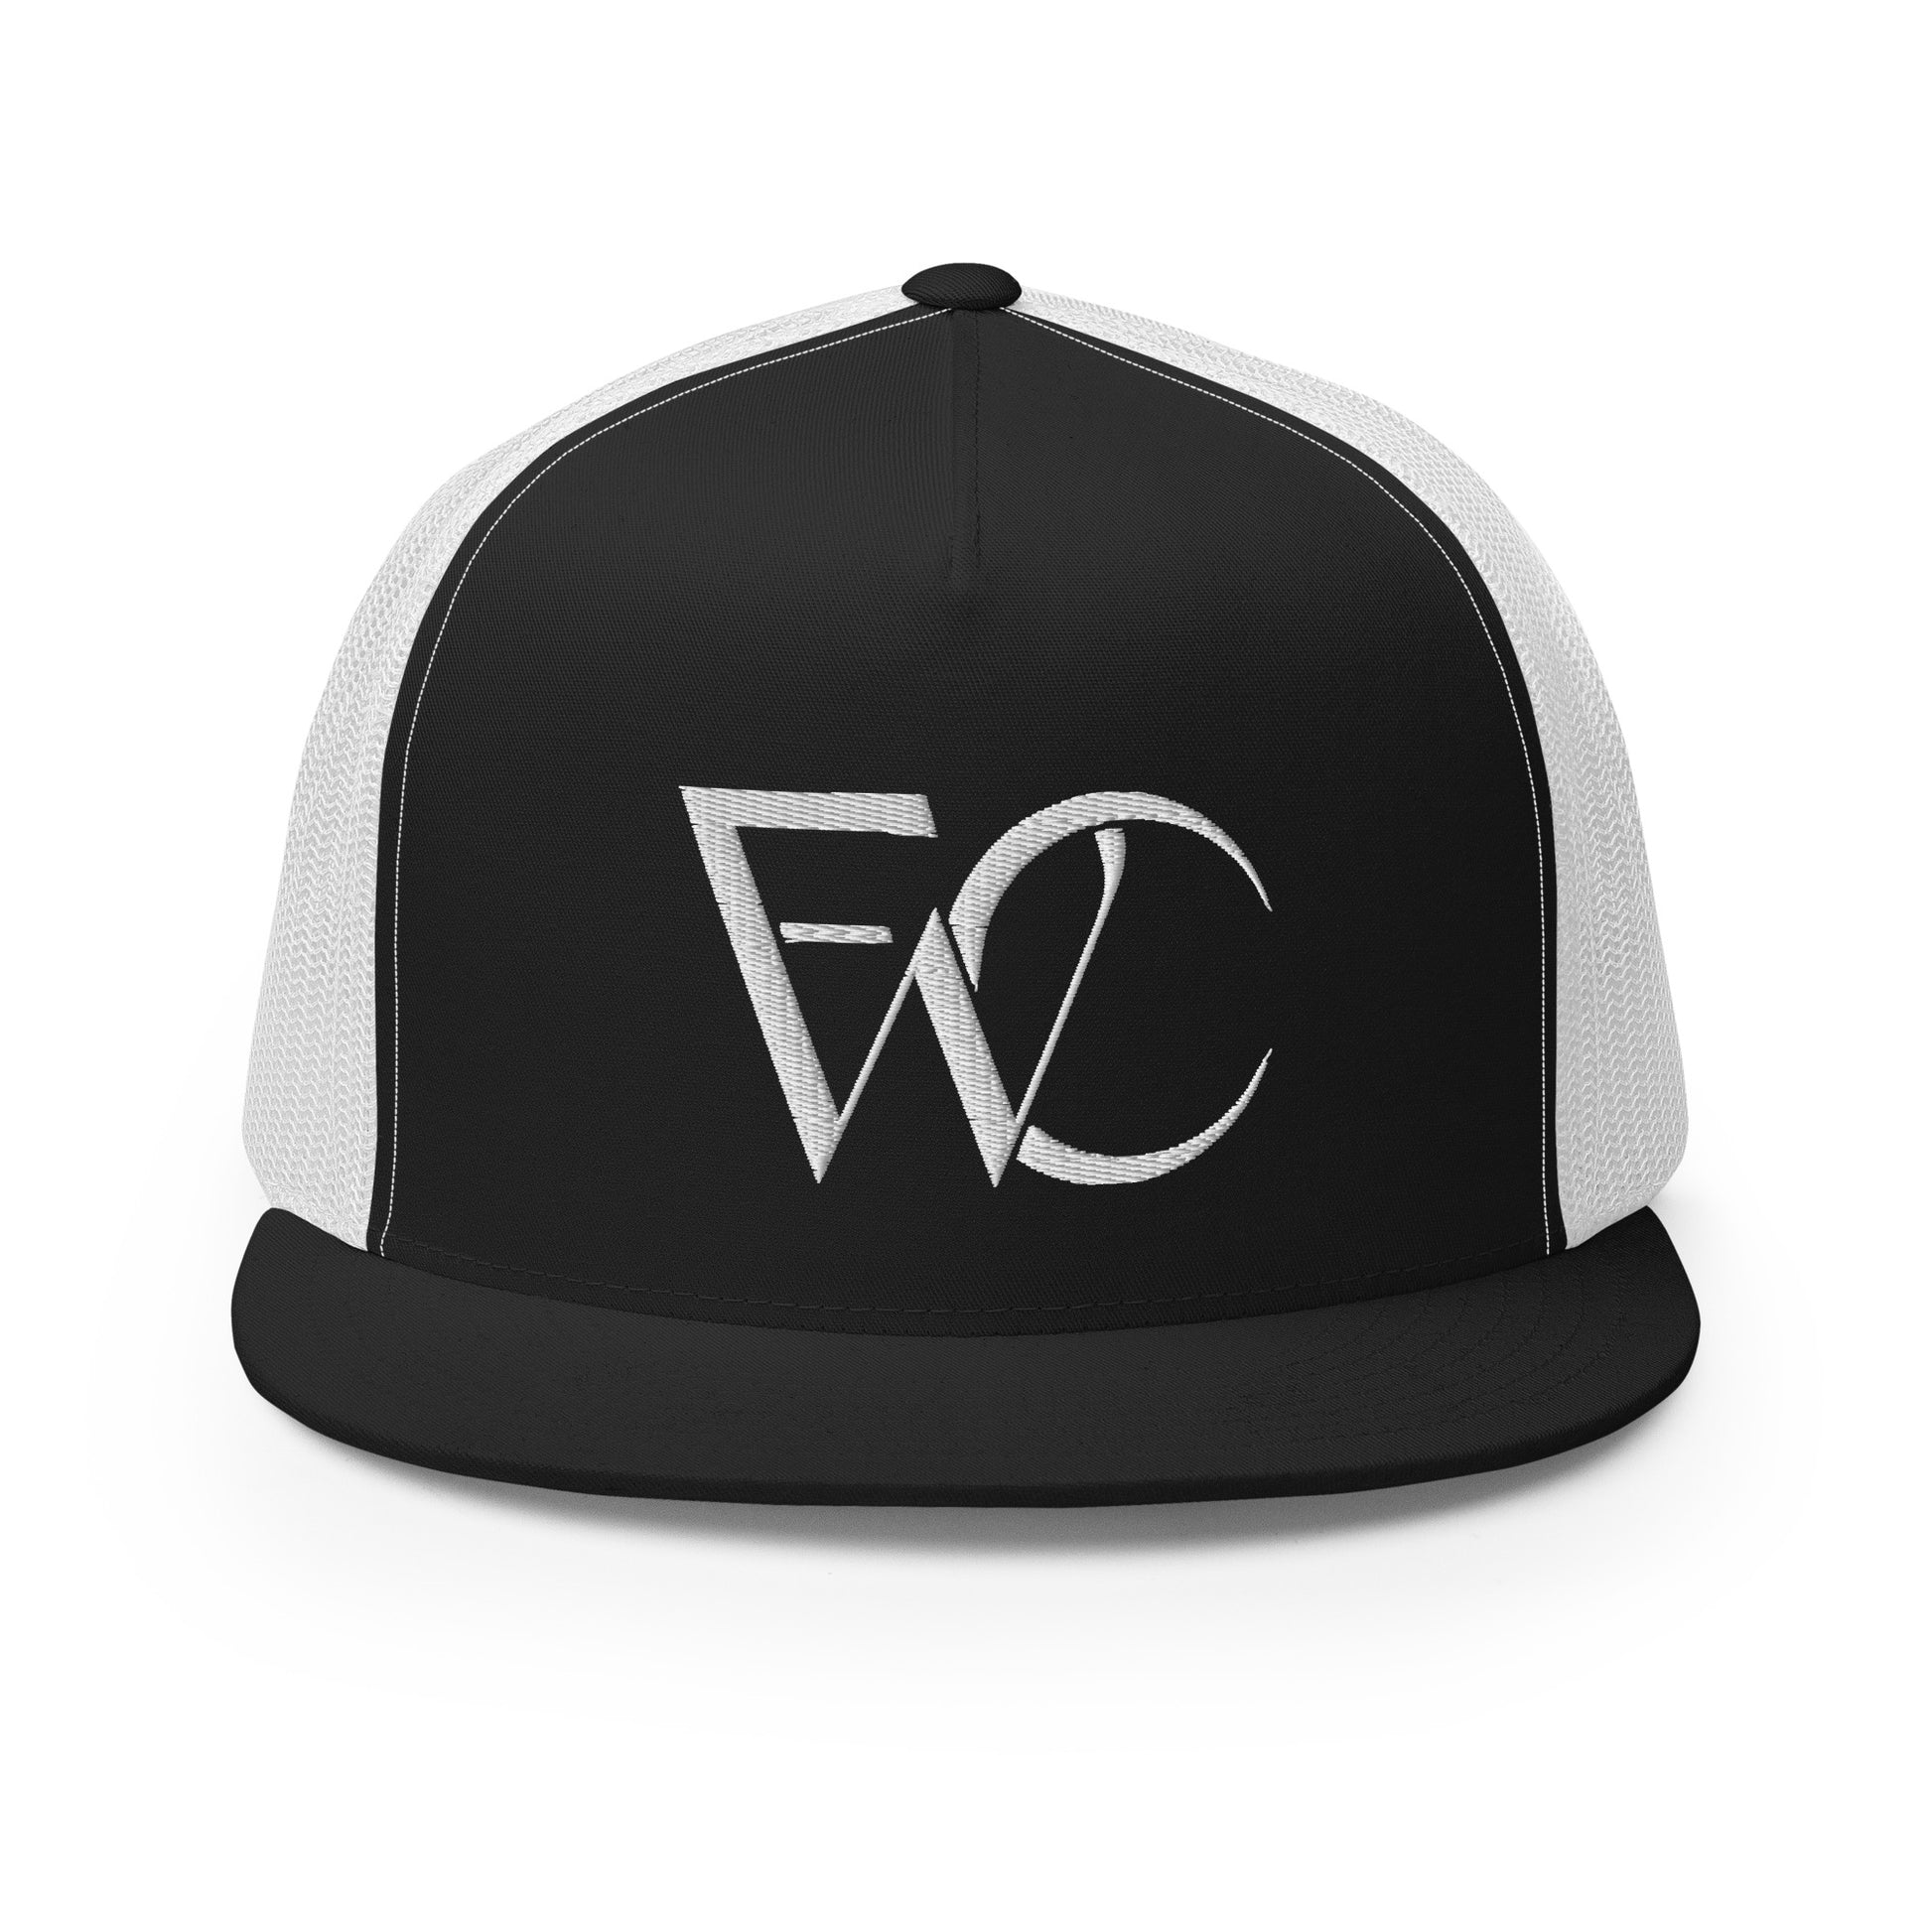 5-panel trucker hat with flat bill, 4 back panels are white, front panel is black with the word the logo mark embroidered on it. logo mark specs out FWC.